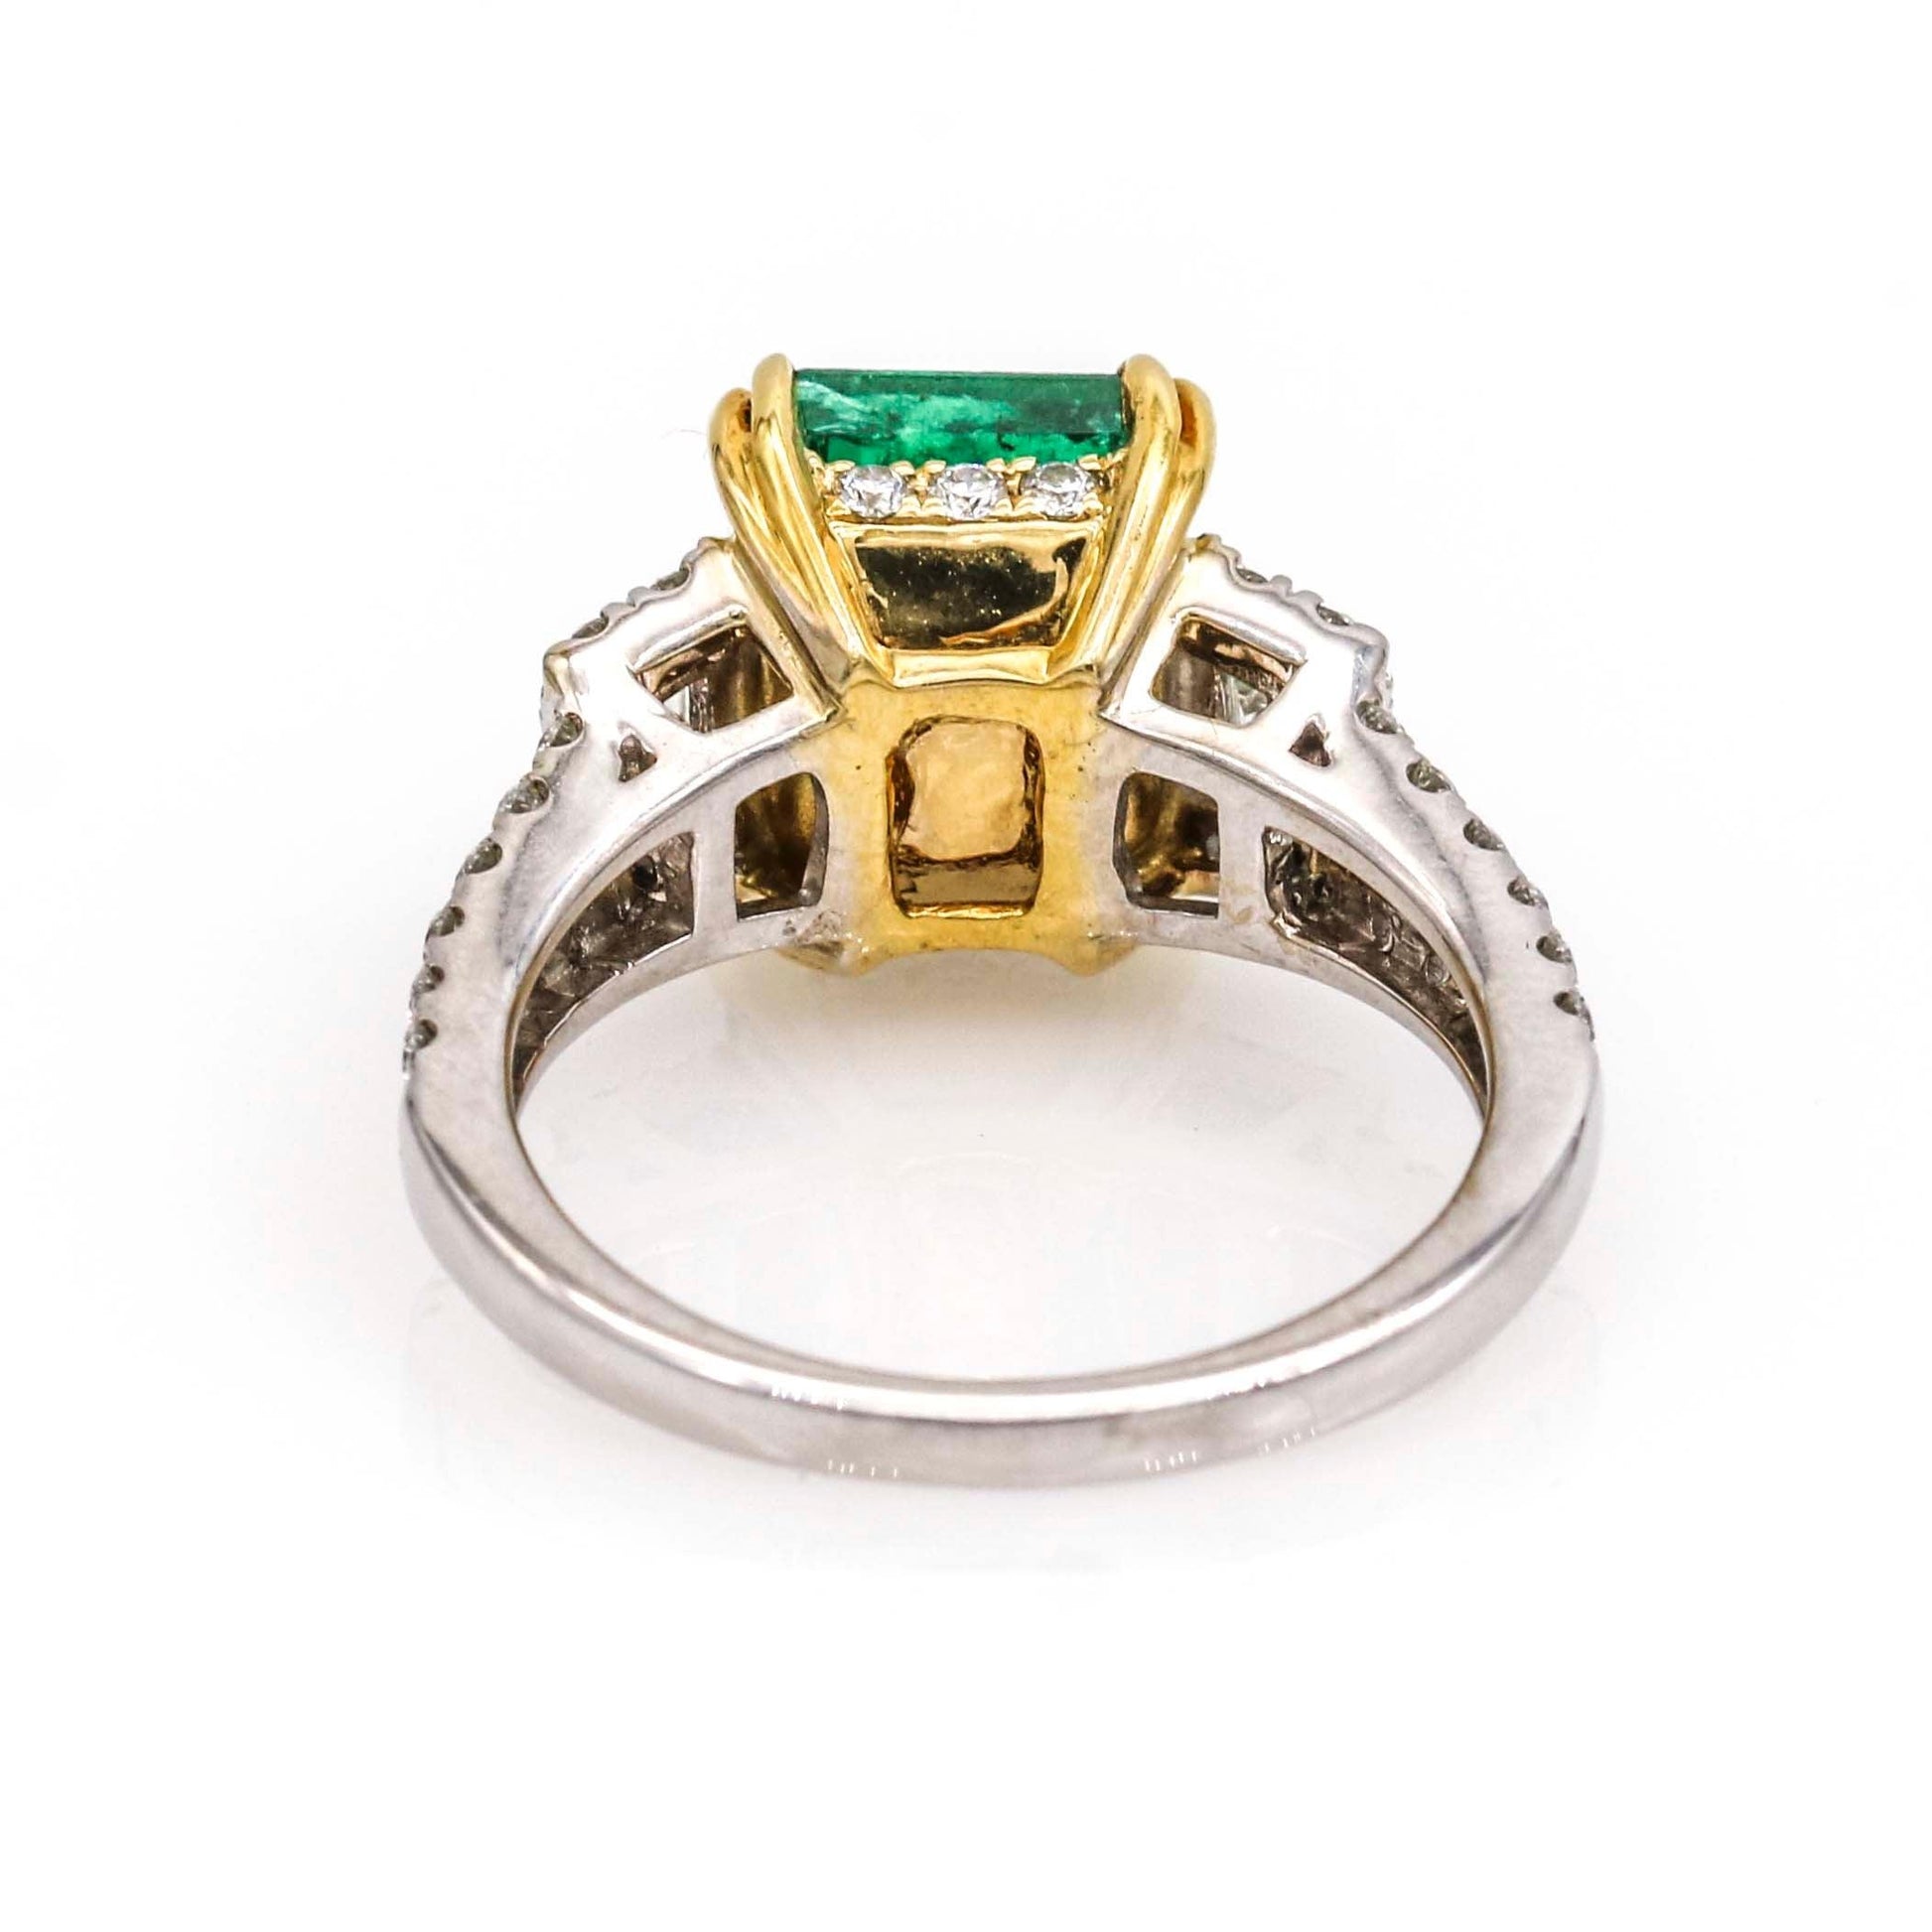 Women's Ed.B Emerald Diamond Ring in 18k Yellow and White Gold 3.68 cttw - 31 Jewels Inc.